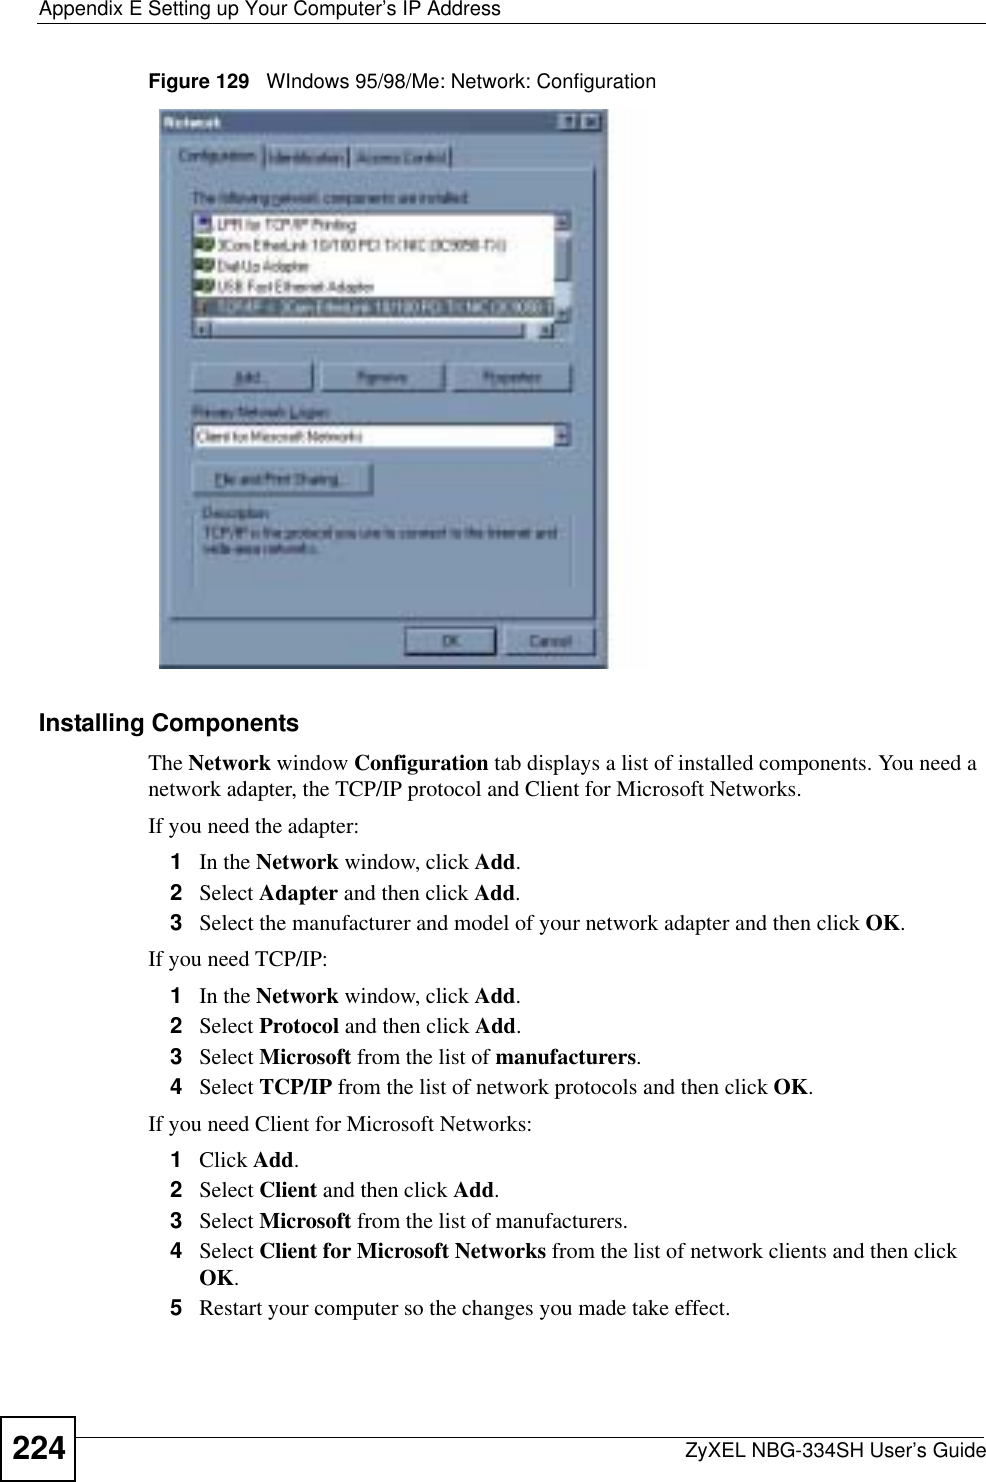 Appendix E Setting up Your Computer’s IP AddressZyXEL NBG-334SH User’s Guide224Figure 129   WIndows 95/98/Me: Network: ConfigurationInstalling ComponentsThe Network window Configuration tab displays a list of installed components. You need a network adapter, the TCP/IP protocol and Client for Microsoft Networks.If you need the adapter:1In the Network window, click Add.2Select Adapter and then click Add.3Select the manufacturer and model of your network adapter and then click OK.If you need TCP/IP:1In the Network window, click Add.2Select Protocol and then click Add.3Select Microsoft from the list of manufacturers.4Select TCP/IP from the list of network protocols and then click OK.If you need Client for Microsoft Networks:1Click Add.2Select Client and then click Add.3Select Microsoft from the list of manufacturers.4Select Client for Microsoft Networks from the list of network clients and then click OK.5Restart your computer so the changes you made take effect.